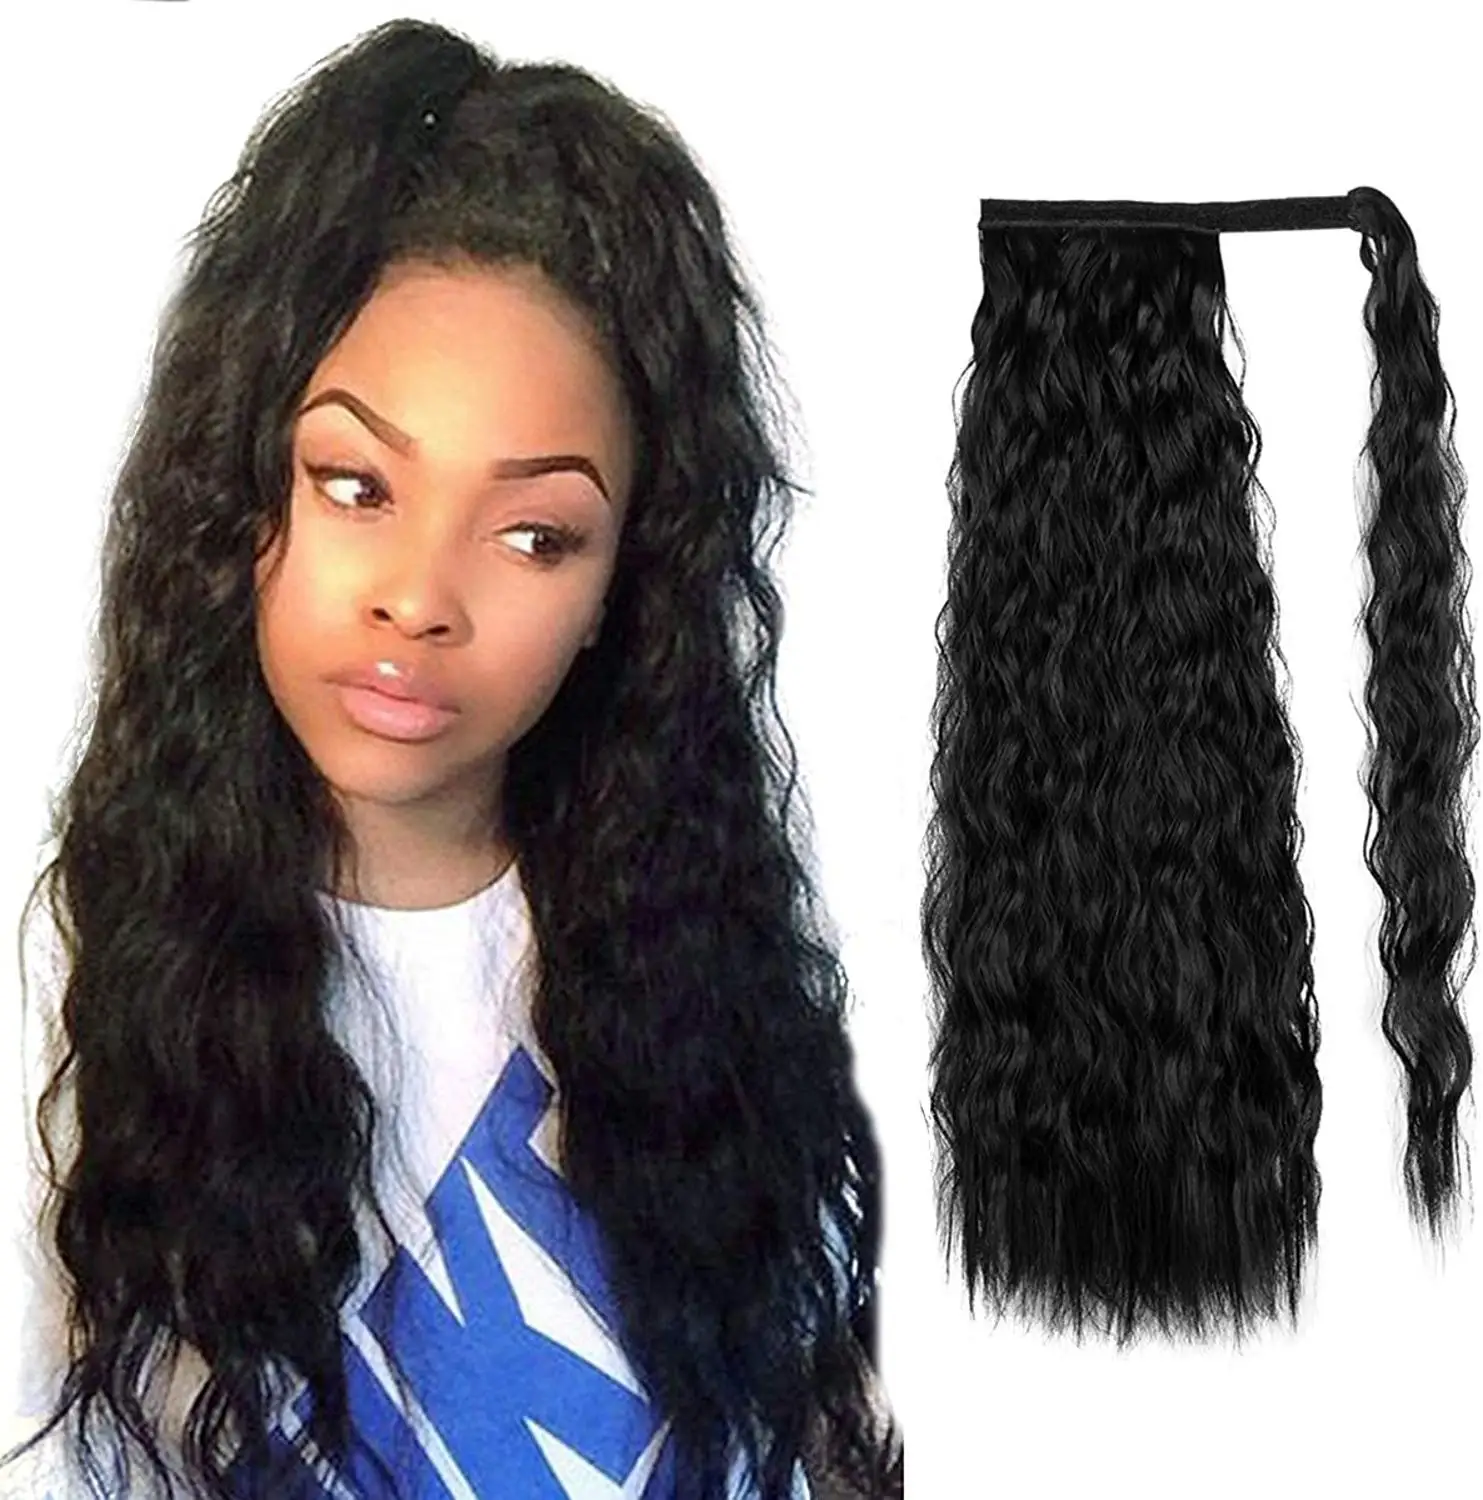 

Kong&Li Synthetic Corn Wavy Long Curly Ponytail Hairpiece Wrap on Clip Hair Extensions Ombre Brown Pony Tail Blonde Fack Hair